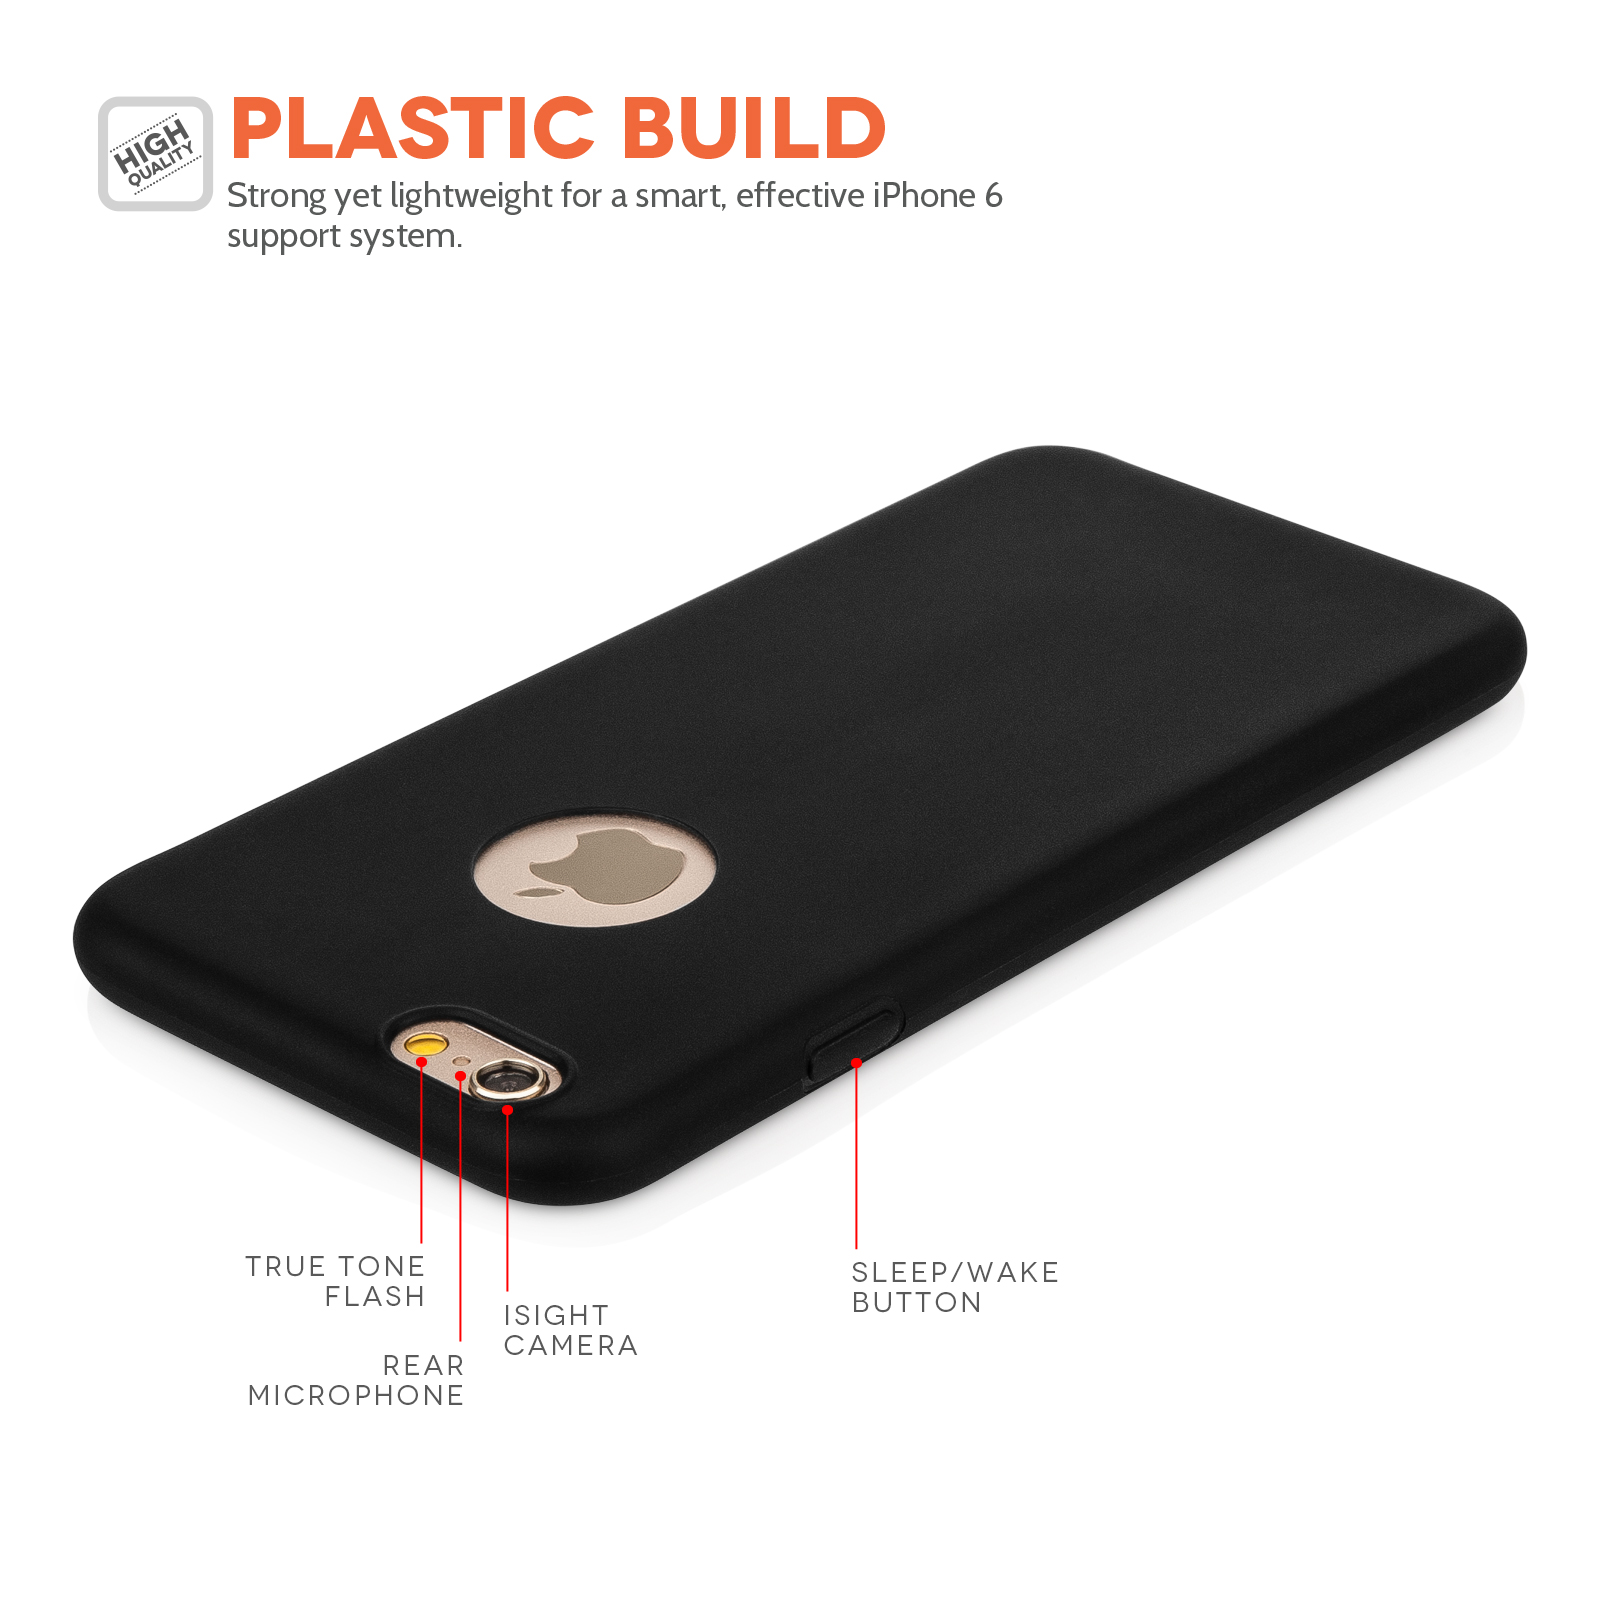 Yousave Accessories  iPhone 6 Plus and 6s Plus Ultra Thin Gel - Solid Black Case